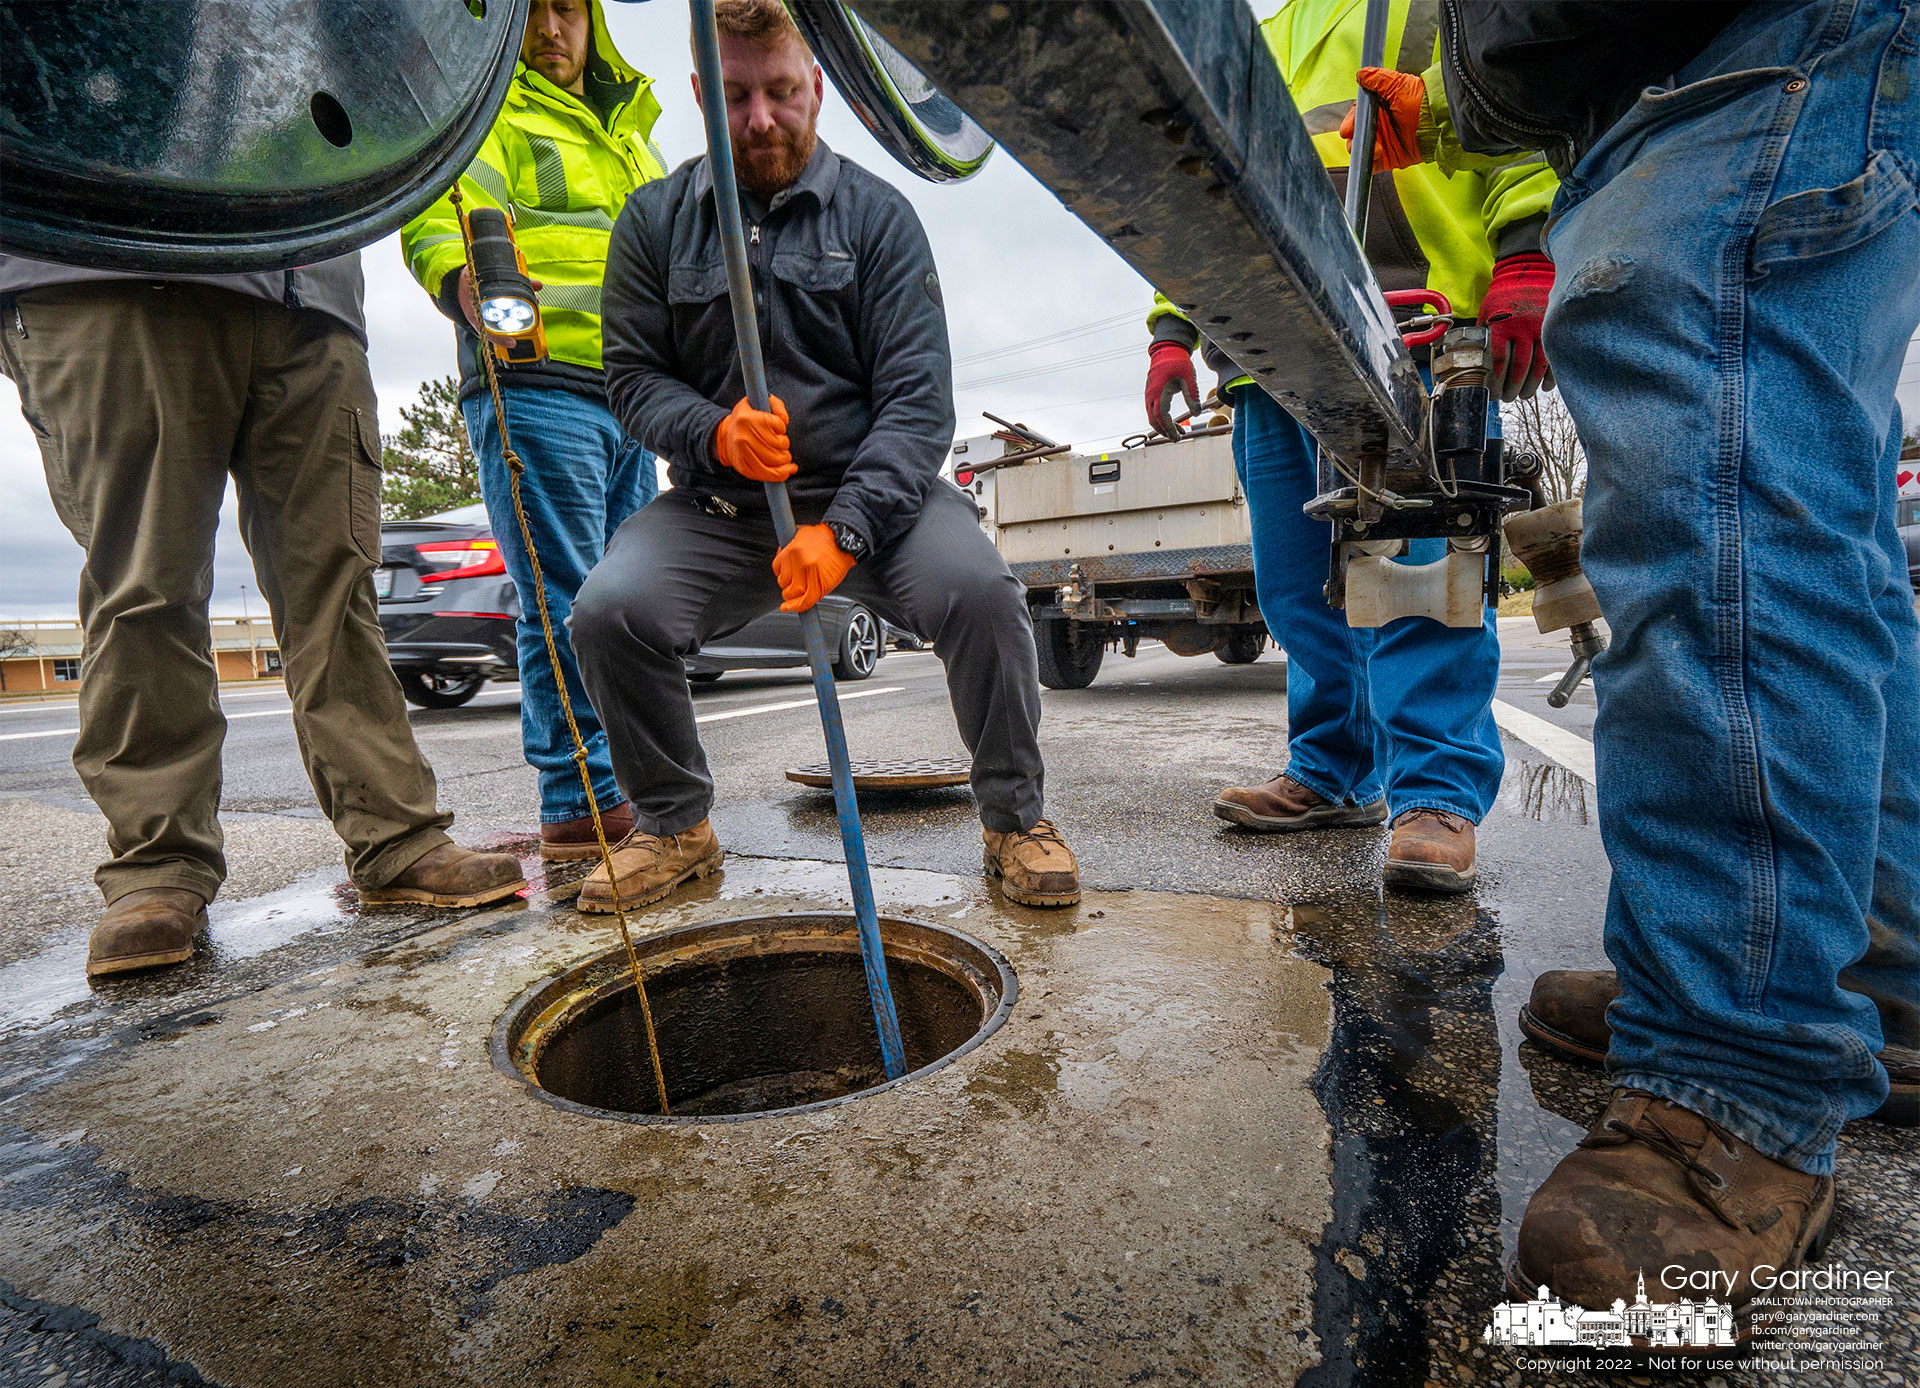 A group of city workers struggles to clear a blocked sanitary sewer pipe that runs beneath Schrock Road near Cleveland Ave. after it was blocked by what appeared to be a root ball causing a backup in several businesses including a dentist's office. My Final Photo for March 7, 2022.